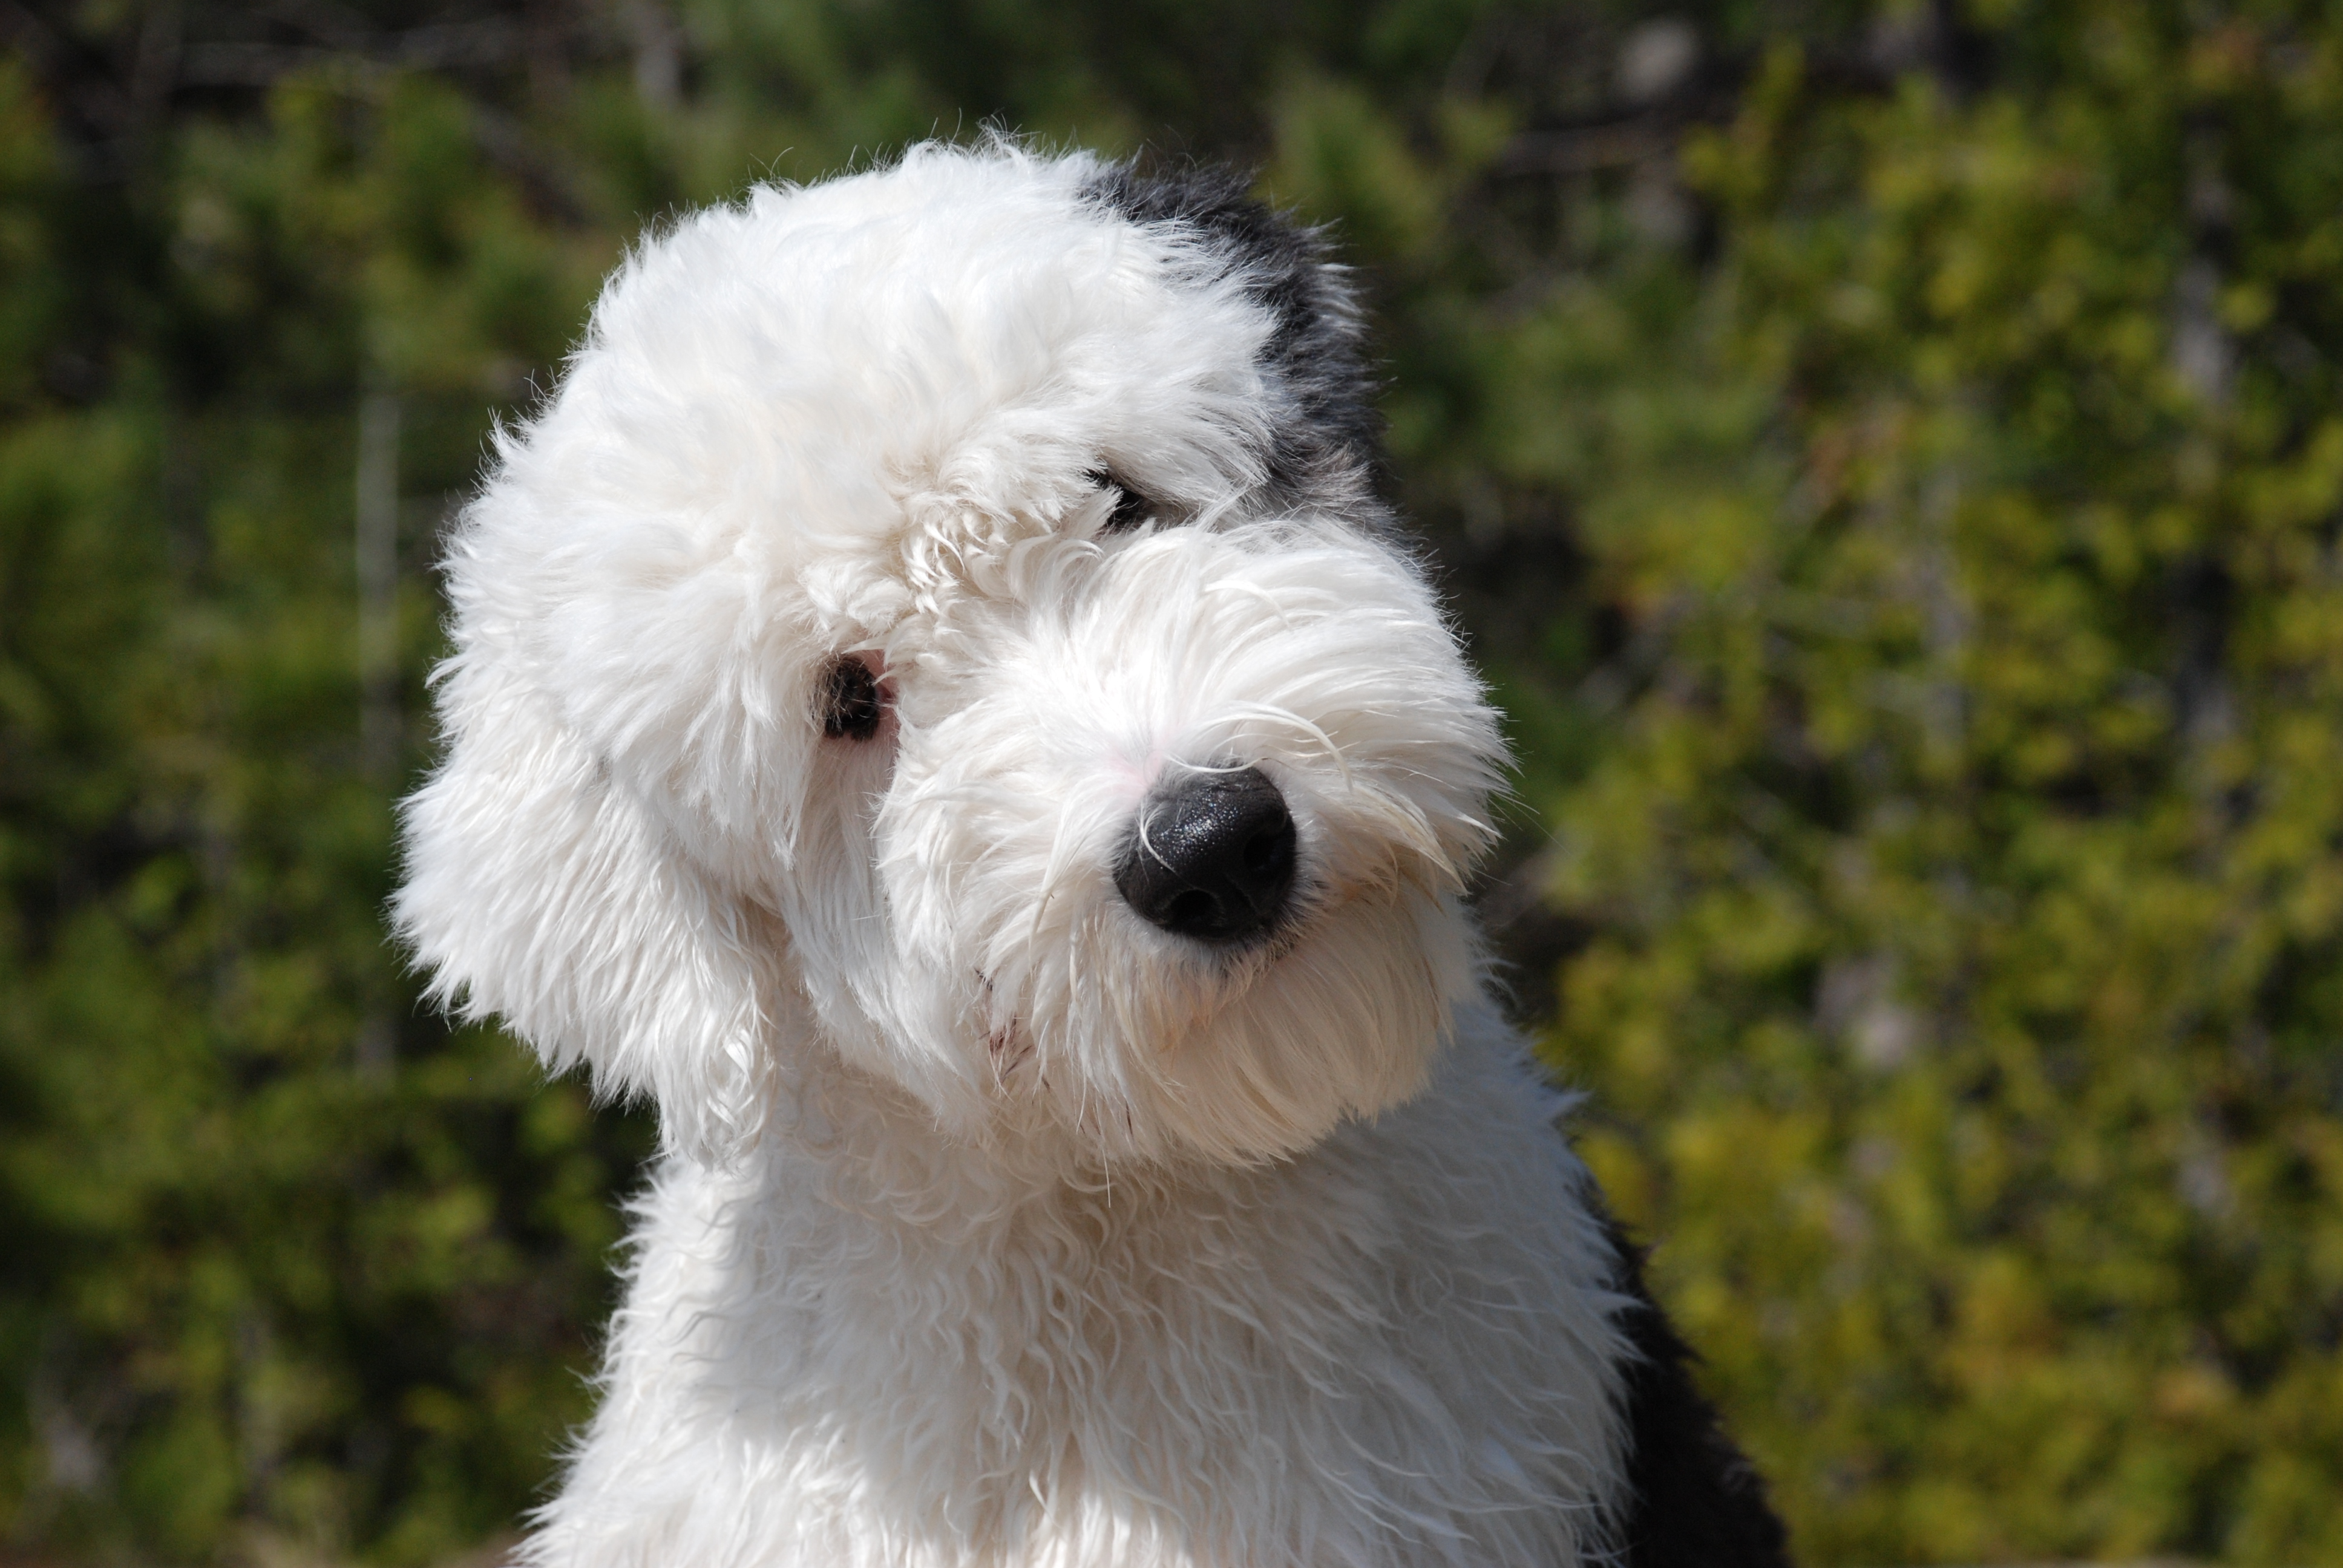 What are the best places to get a hypoallergenic dog?